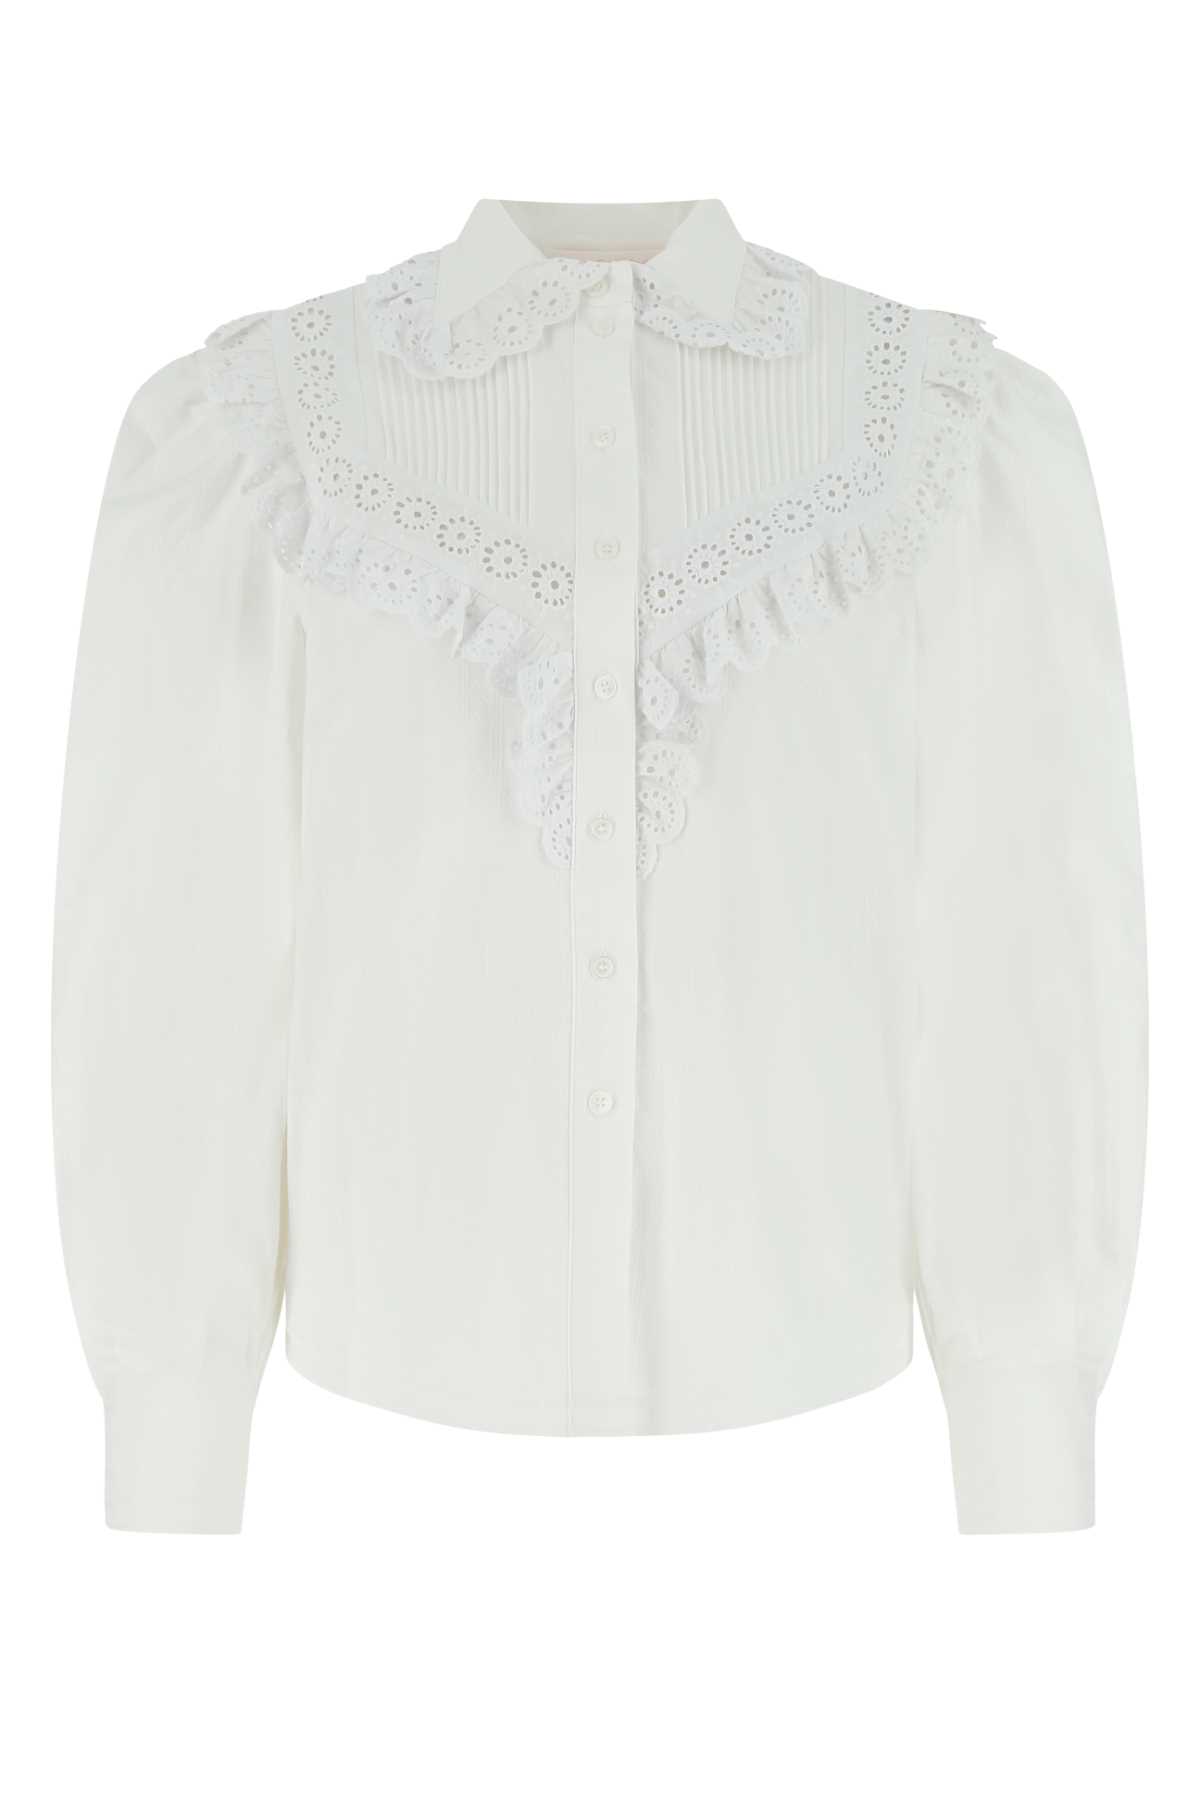 See By Chloé White Cotton Shirt In 101